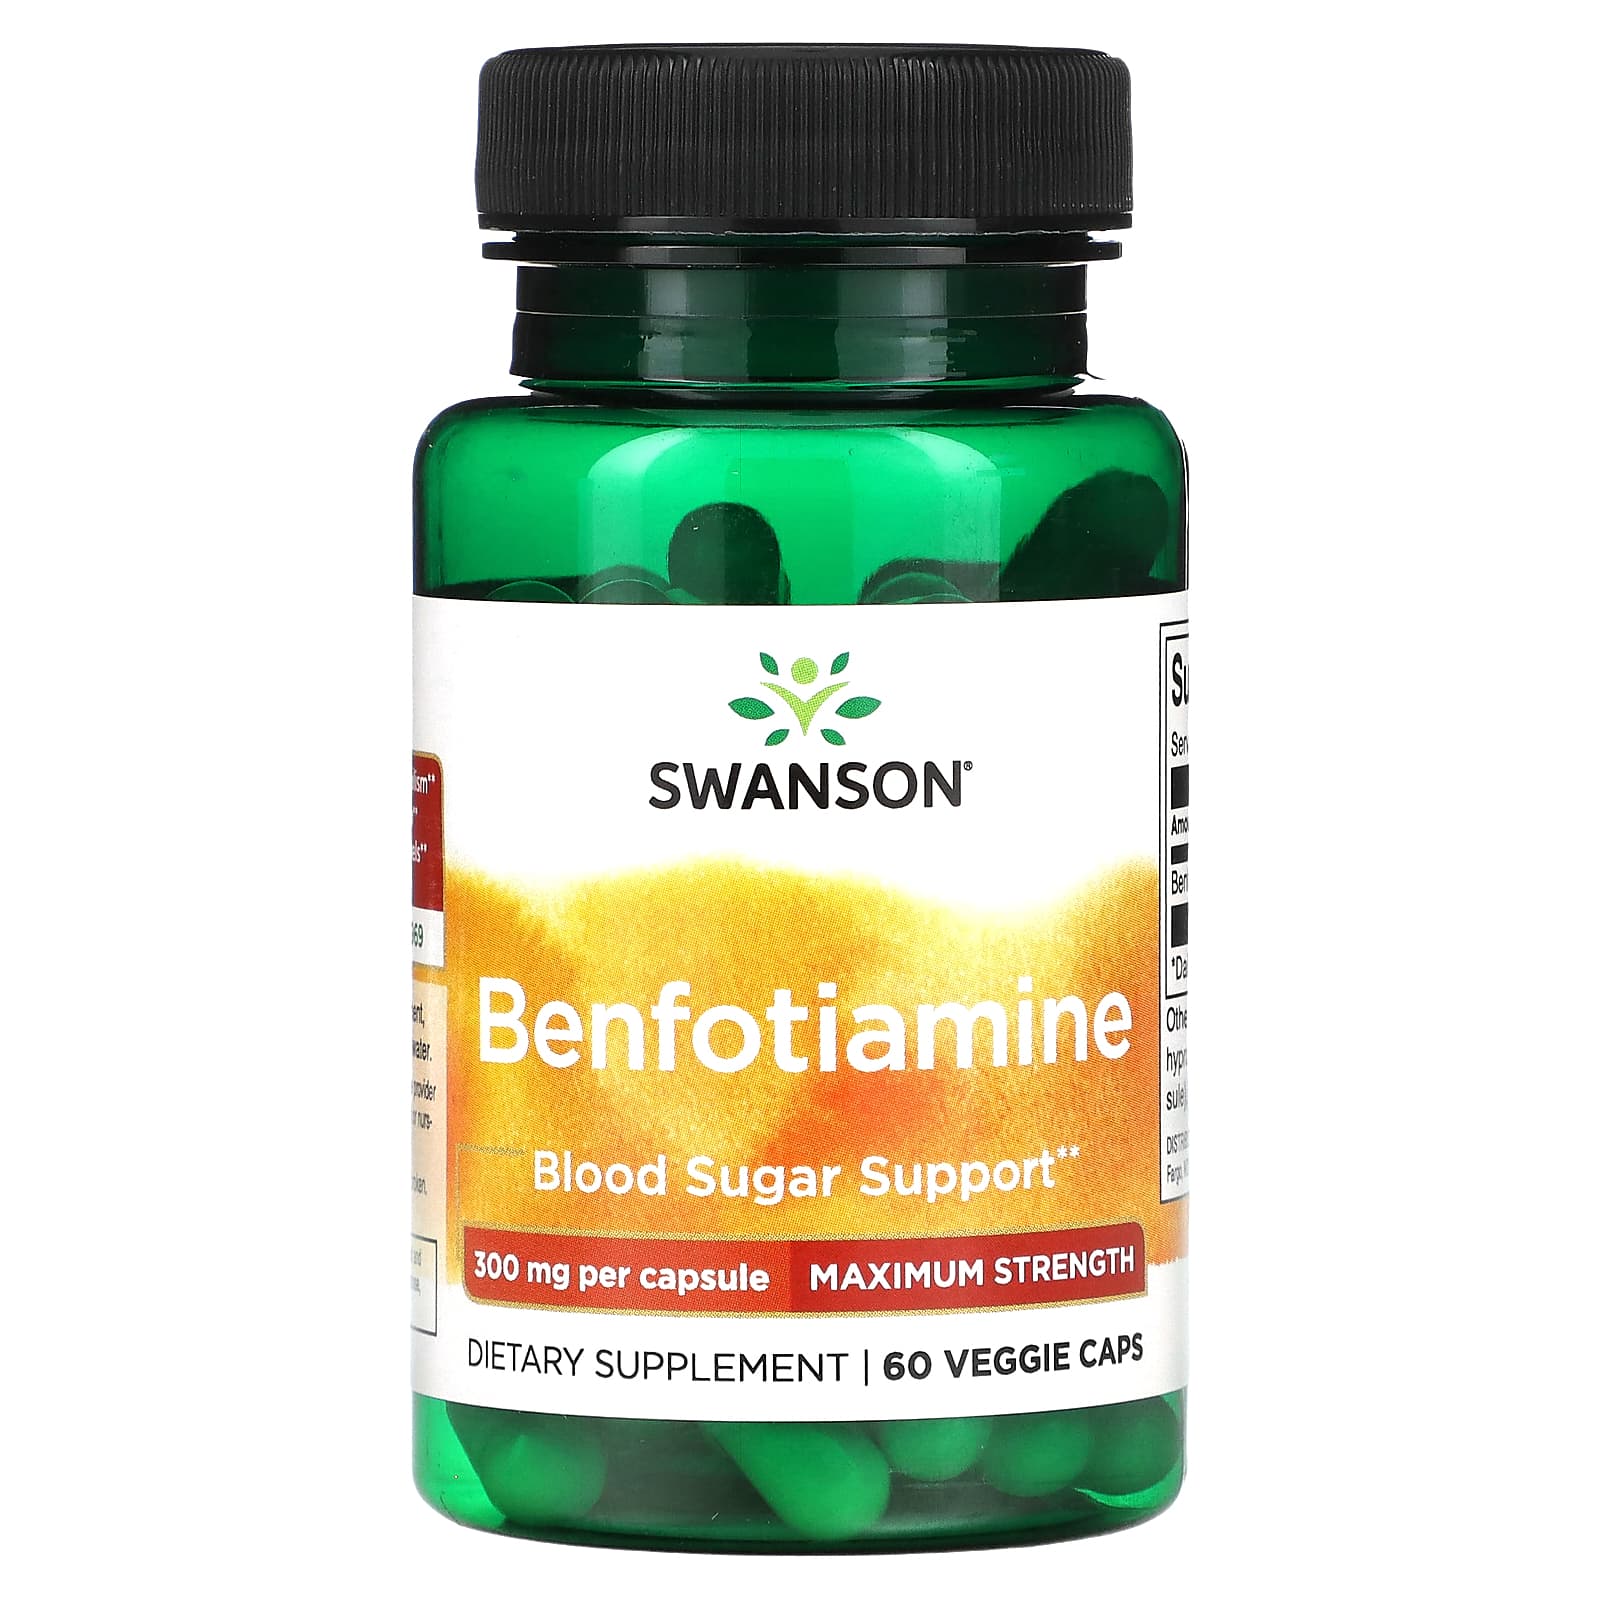  Benfotiamine 300mg Servings (Third Party Tested, 120